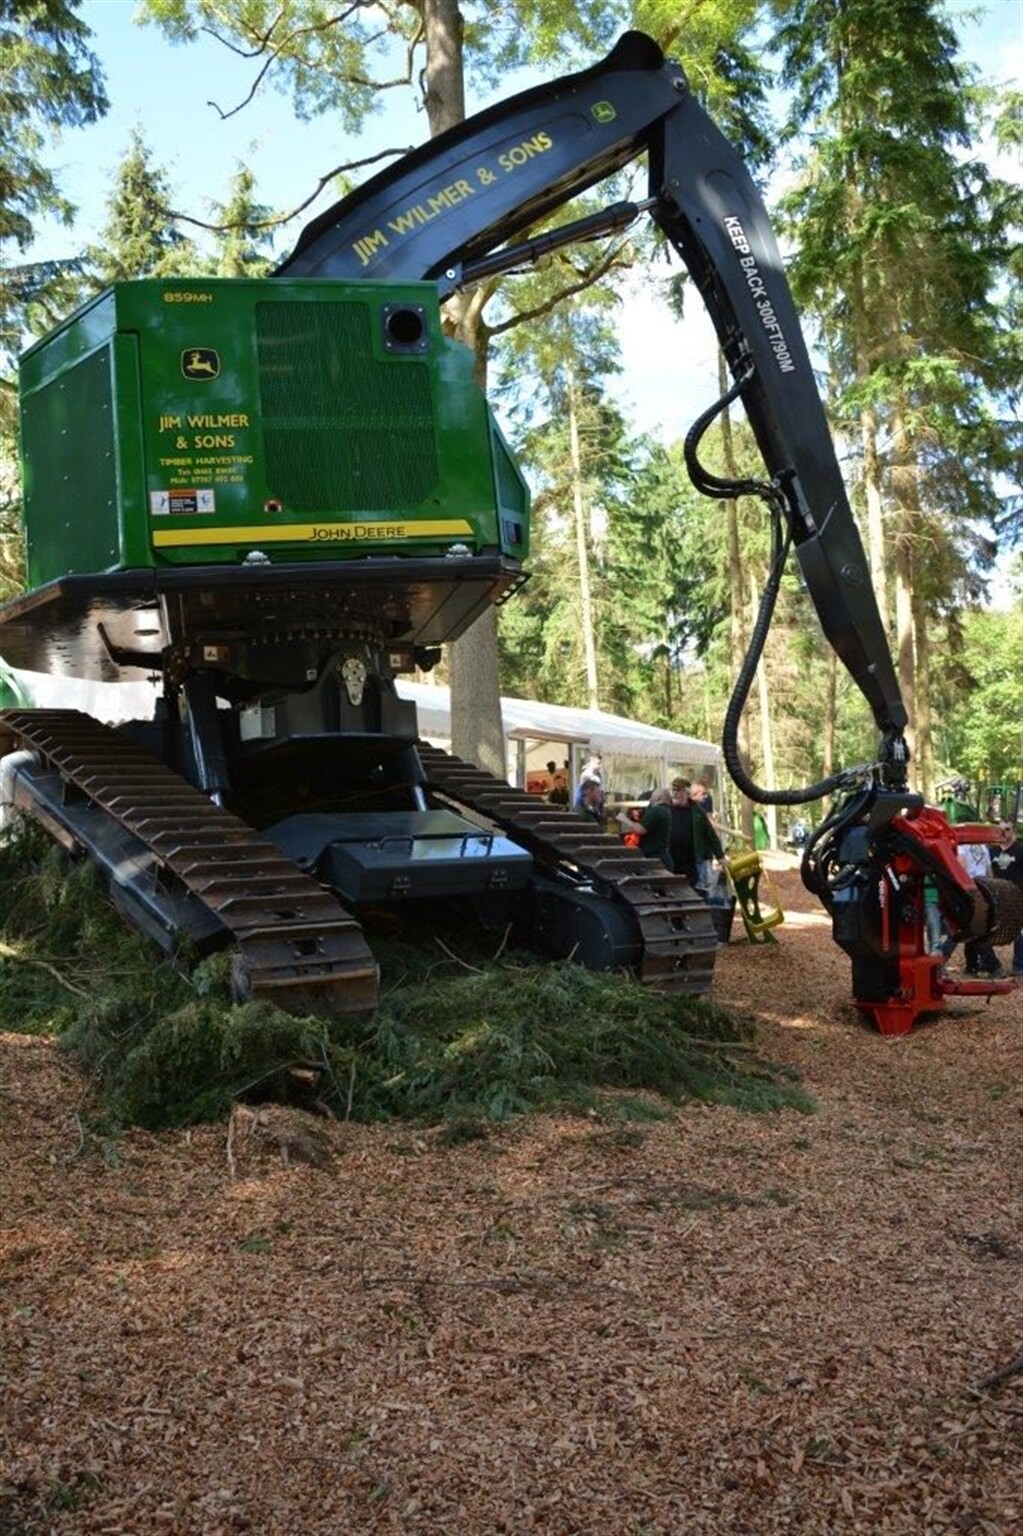 Nothing runs like a Deere in the forest